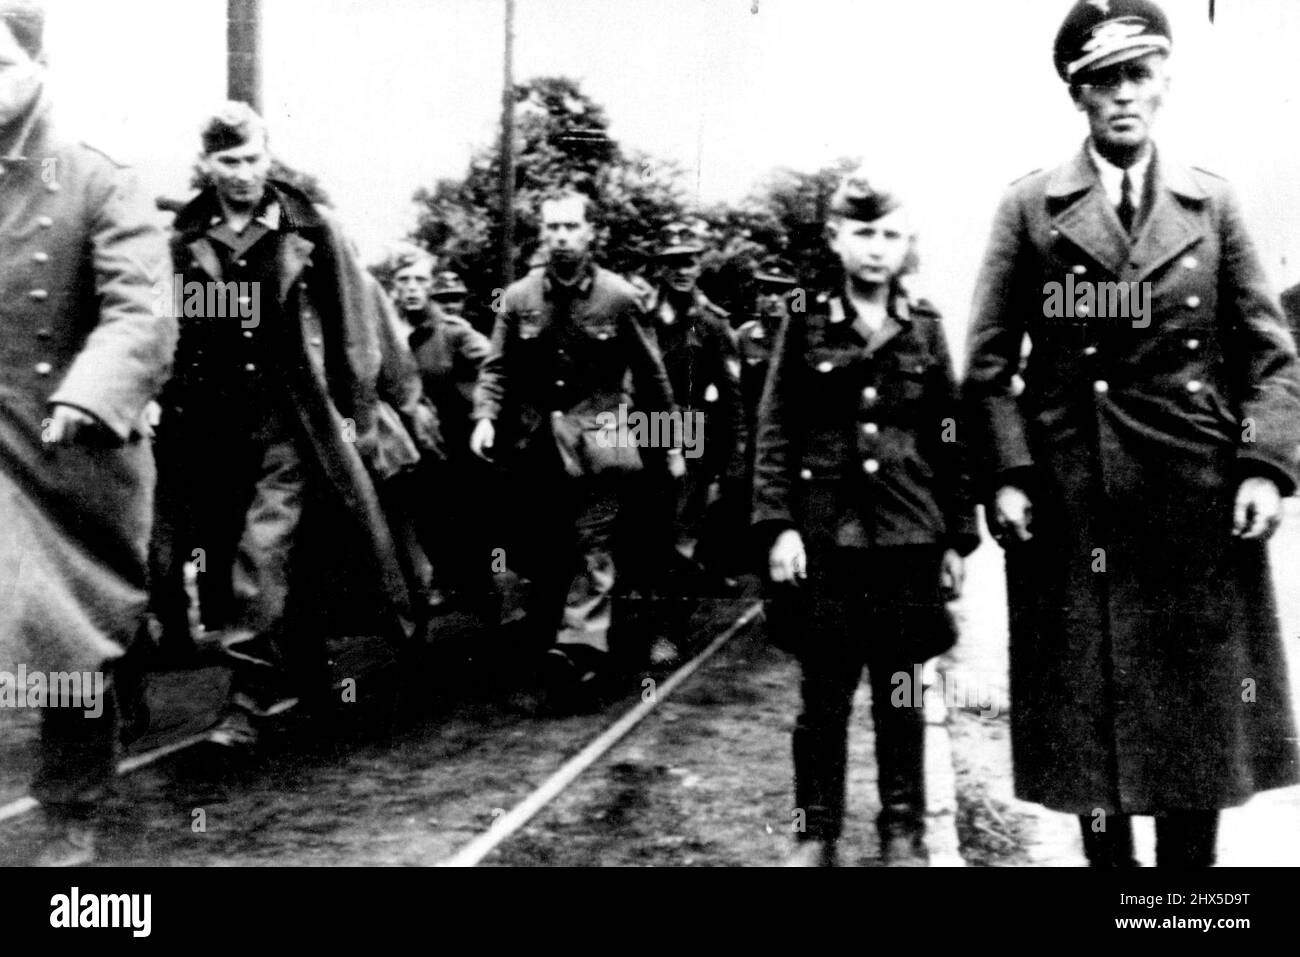 10-Year-Old Among Antwerp Prisoners This ten-year-old but standing beside his Major, was among German Prisoners captured at Antwerp, Belgium, by advancing Allies. Other German Prisoners file past at left. September 8, 1944. (Photo by Associated Press Radiophoto). Stock Photo